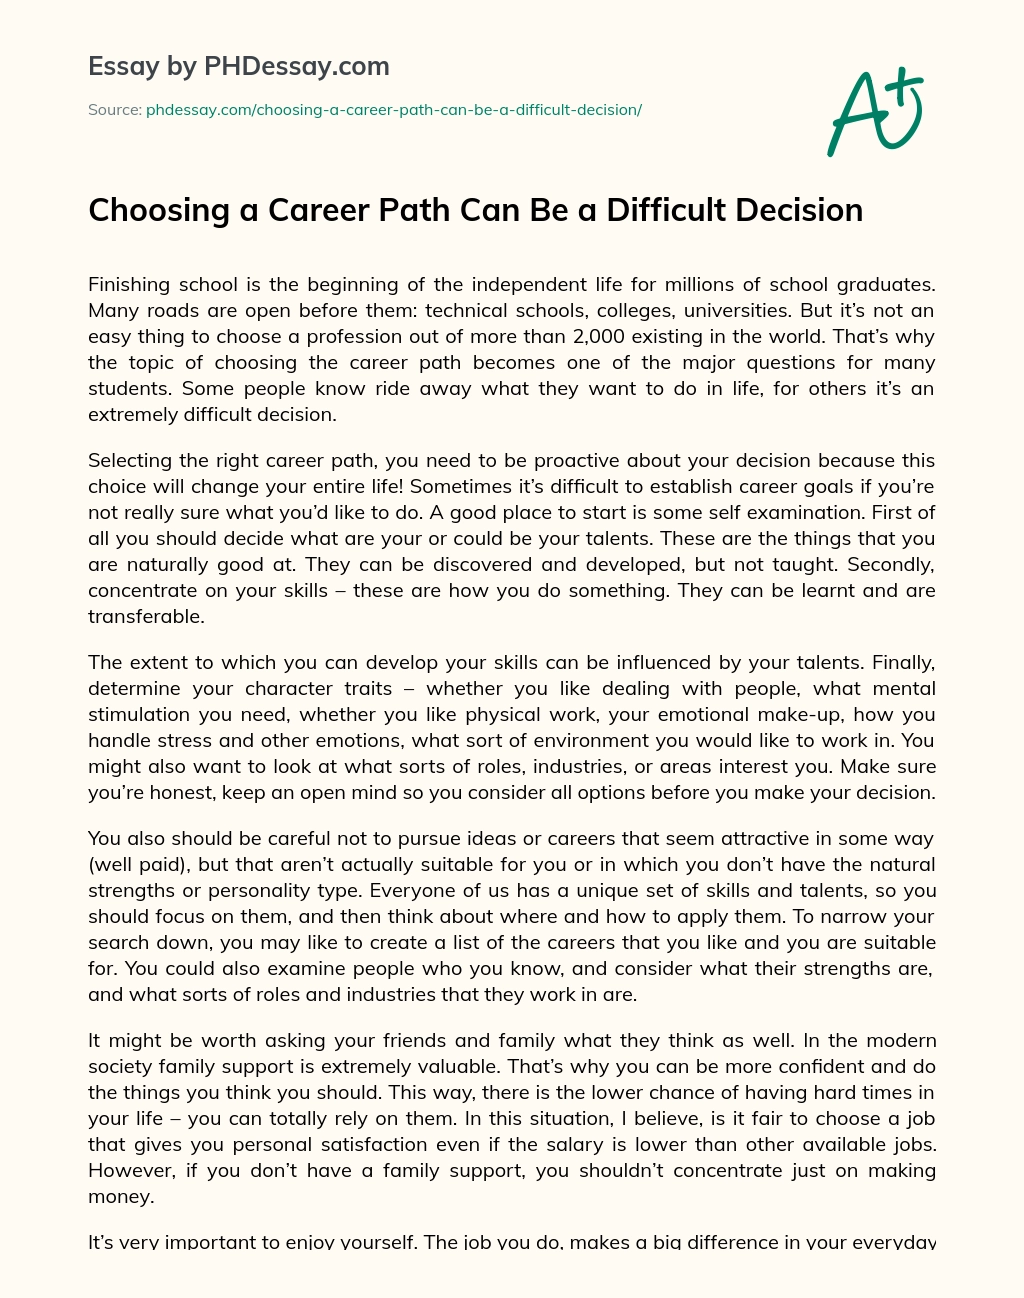 Choosing a Career Path Can Be a Difficult Decision essay